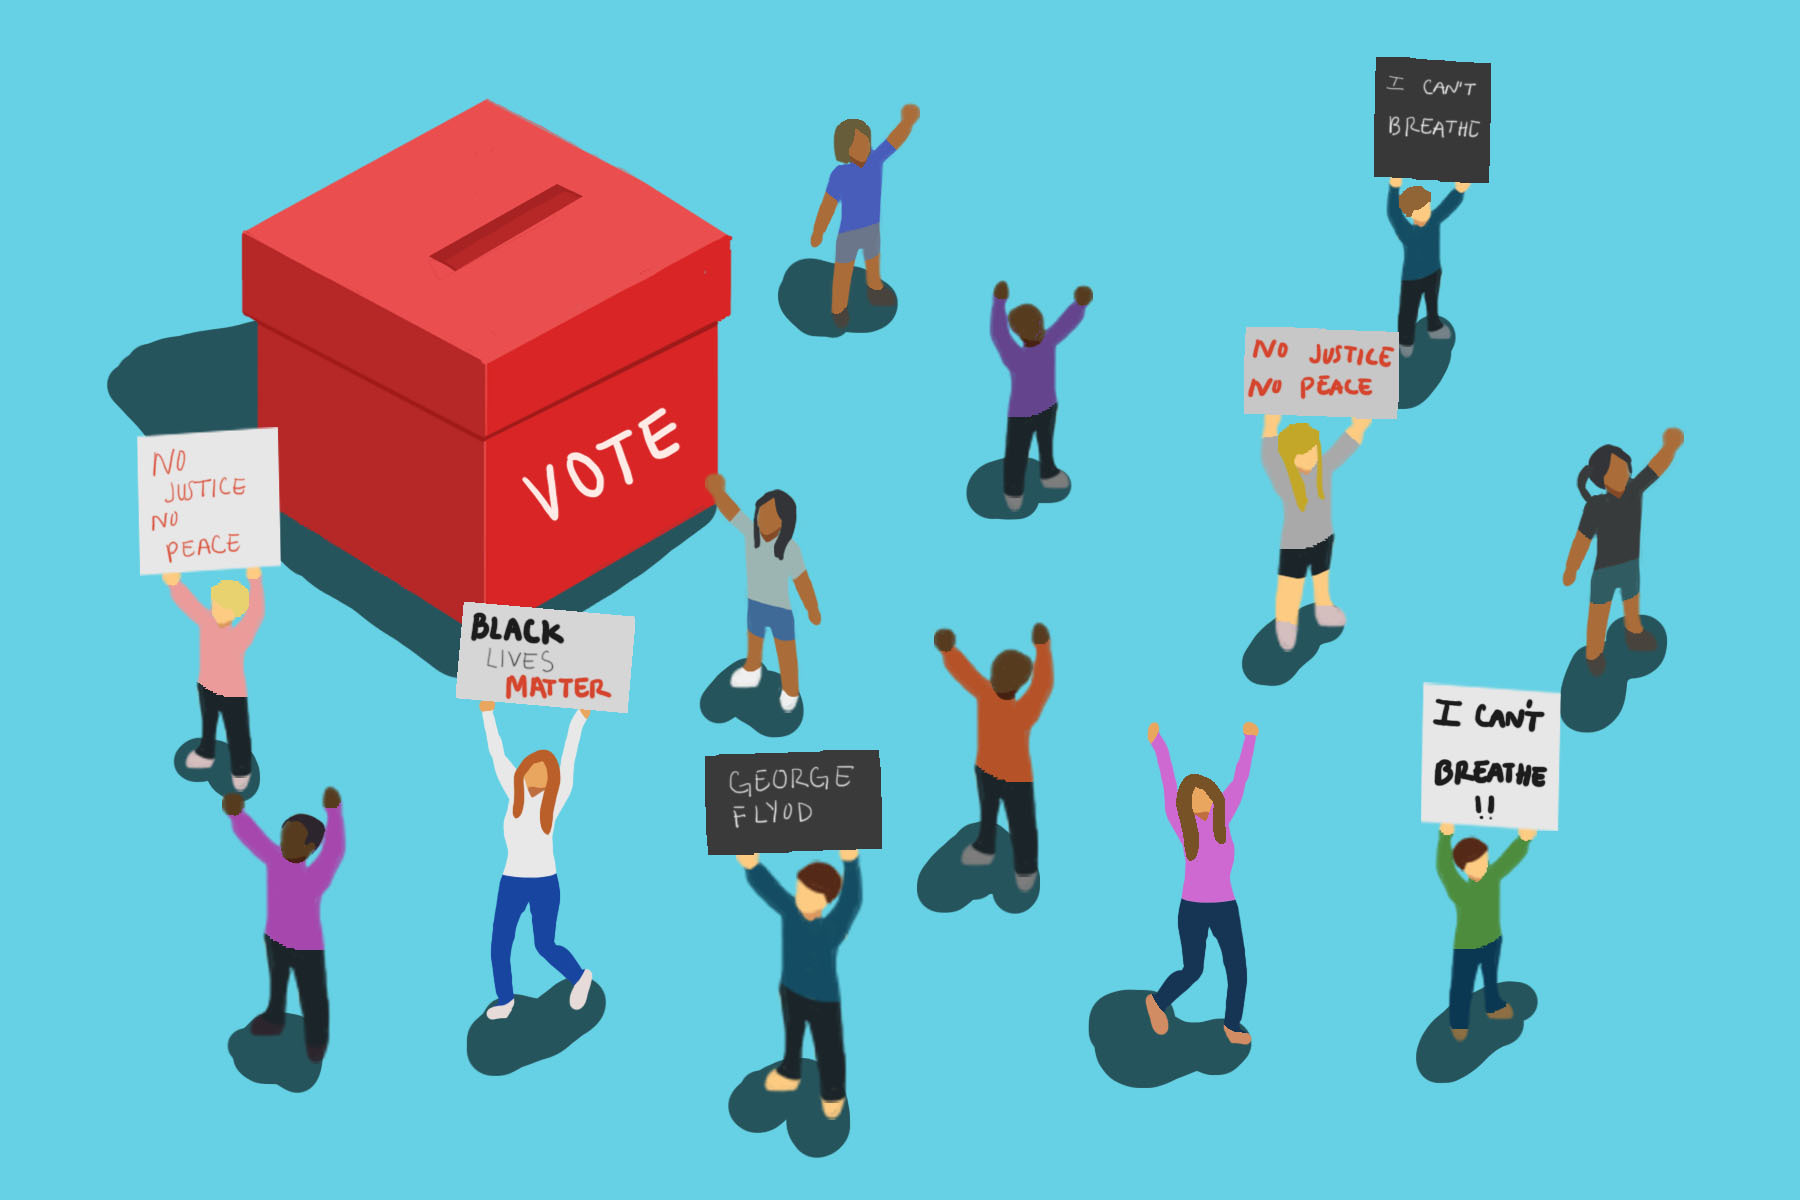 Illustration by Diana Egan of young people protesting and casting the vote